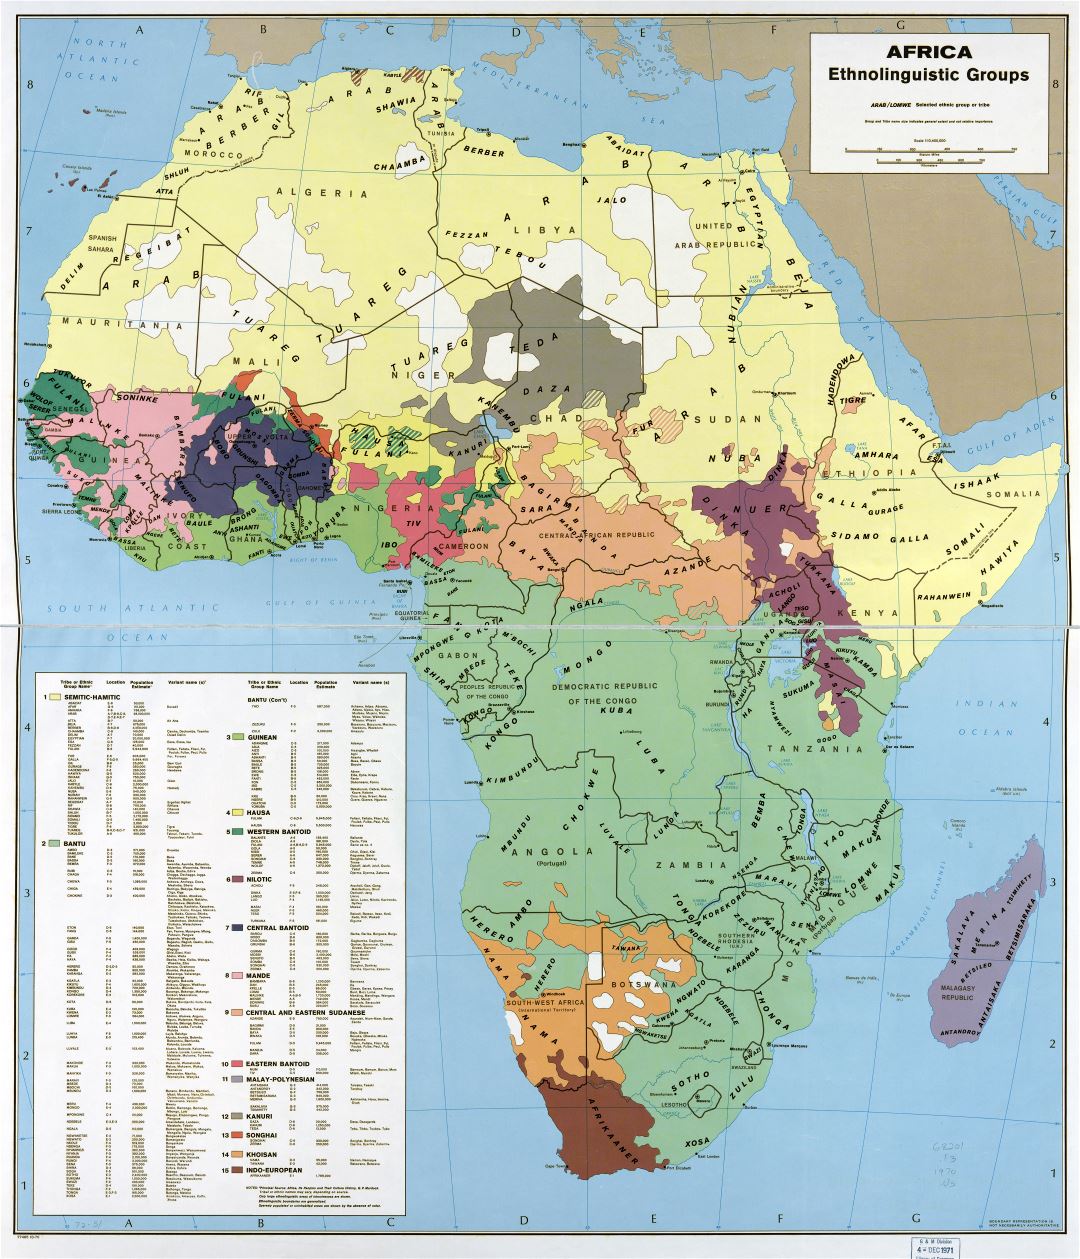 Large scale detail Africa - Ethnolinguistic groups map - 1970